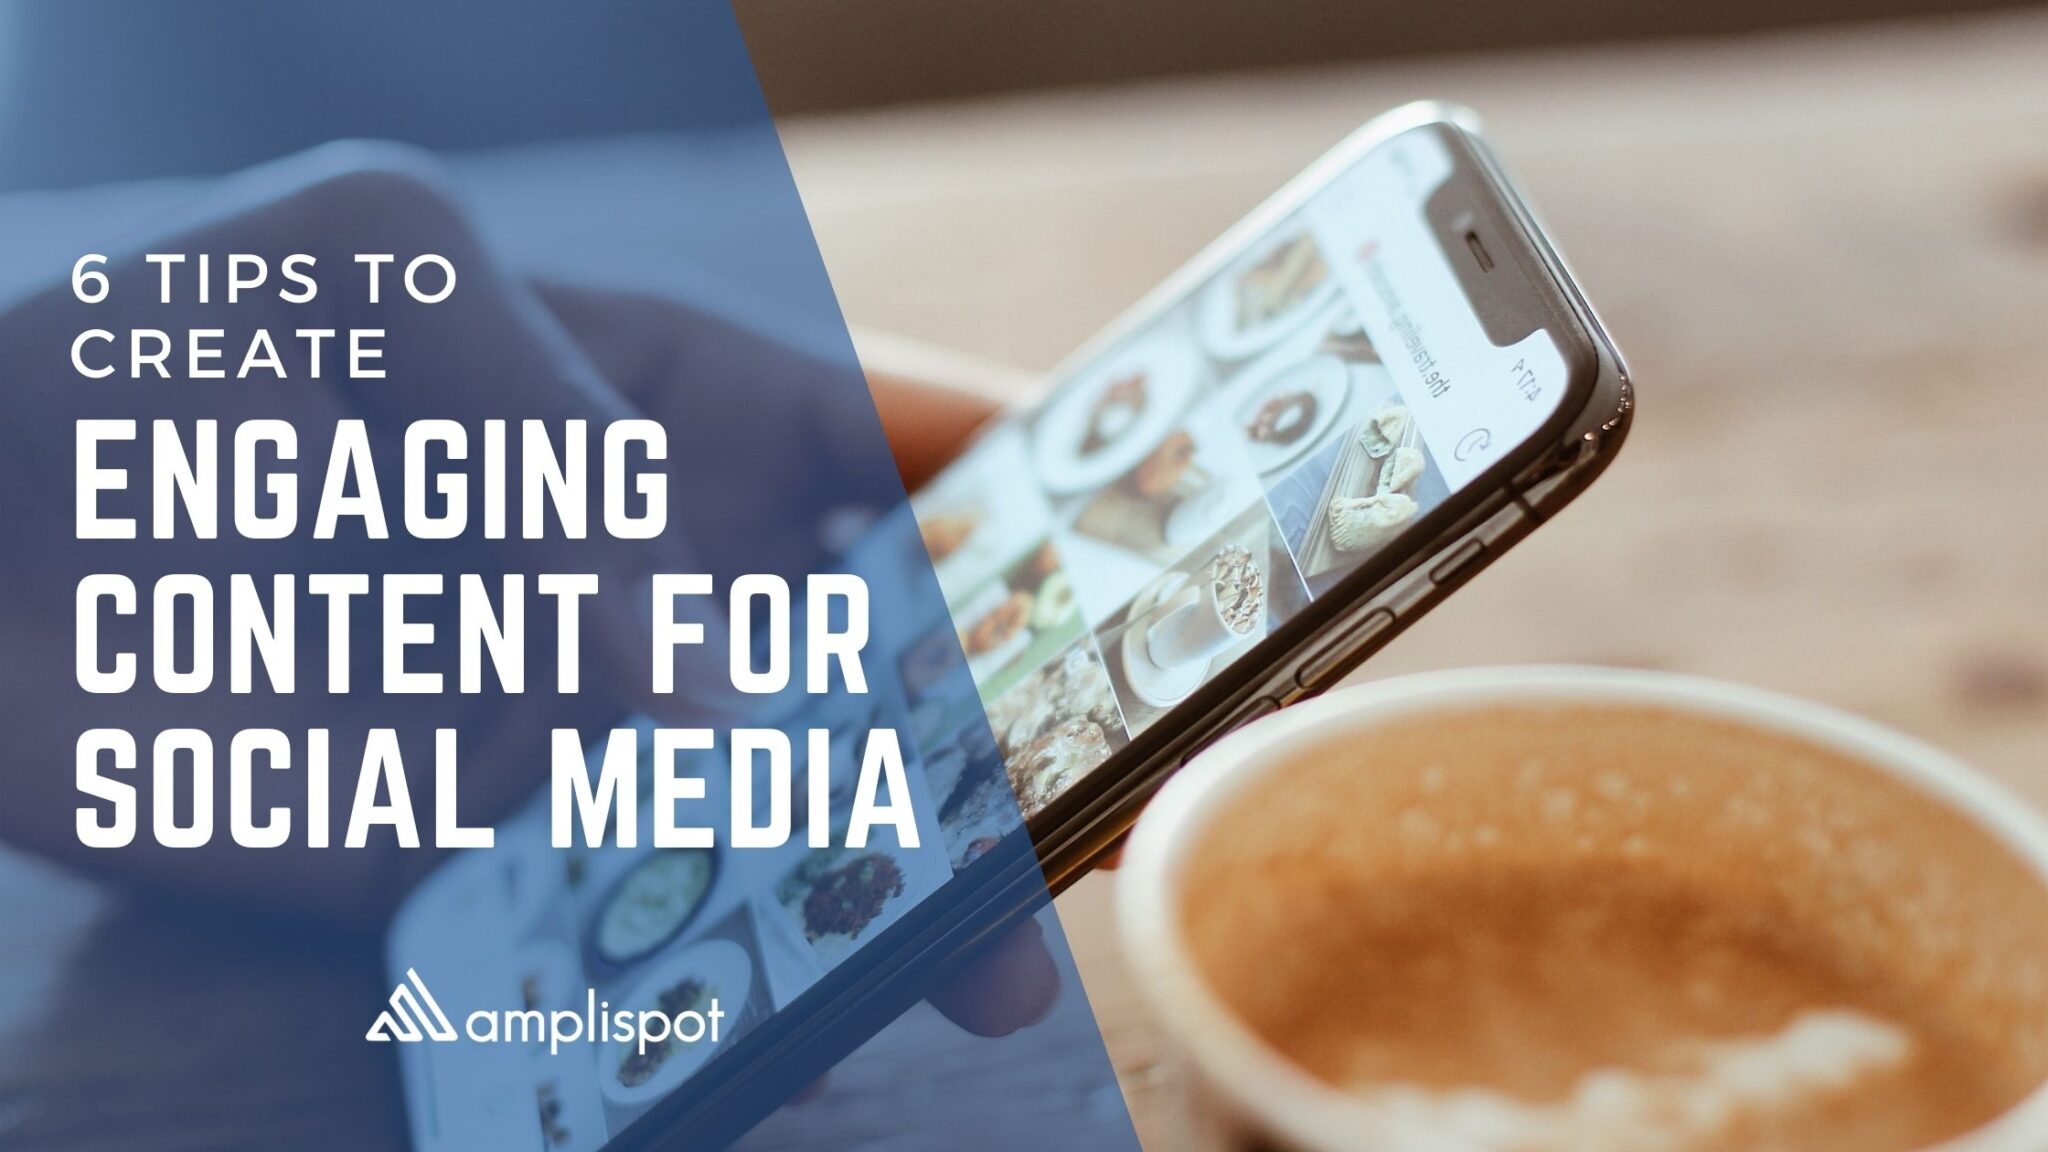 6 Tips to Create Engaging Content for Social Media